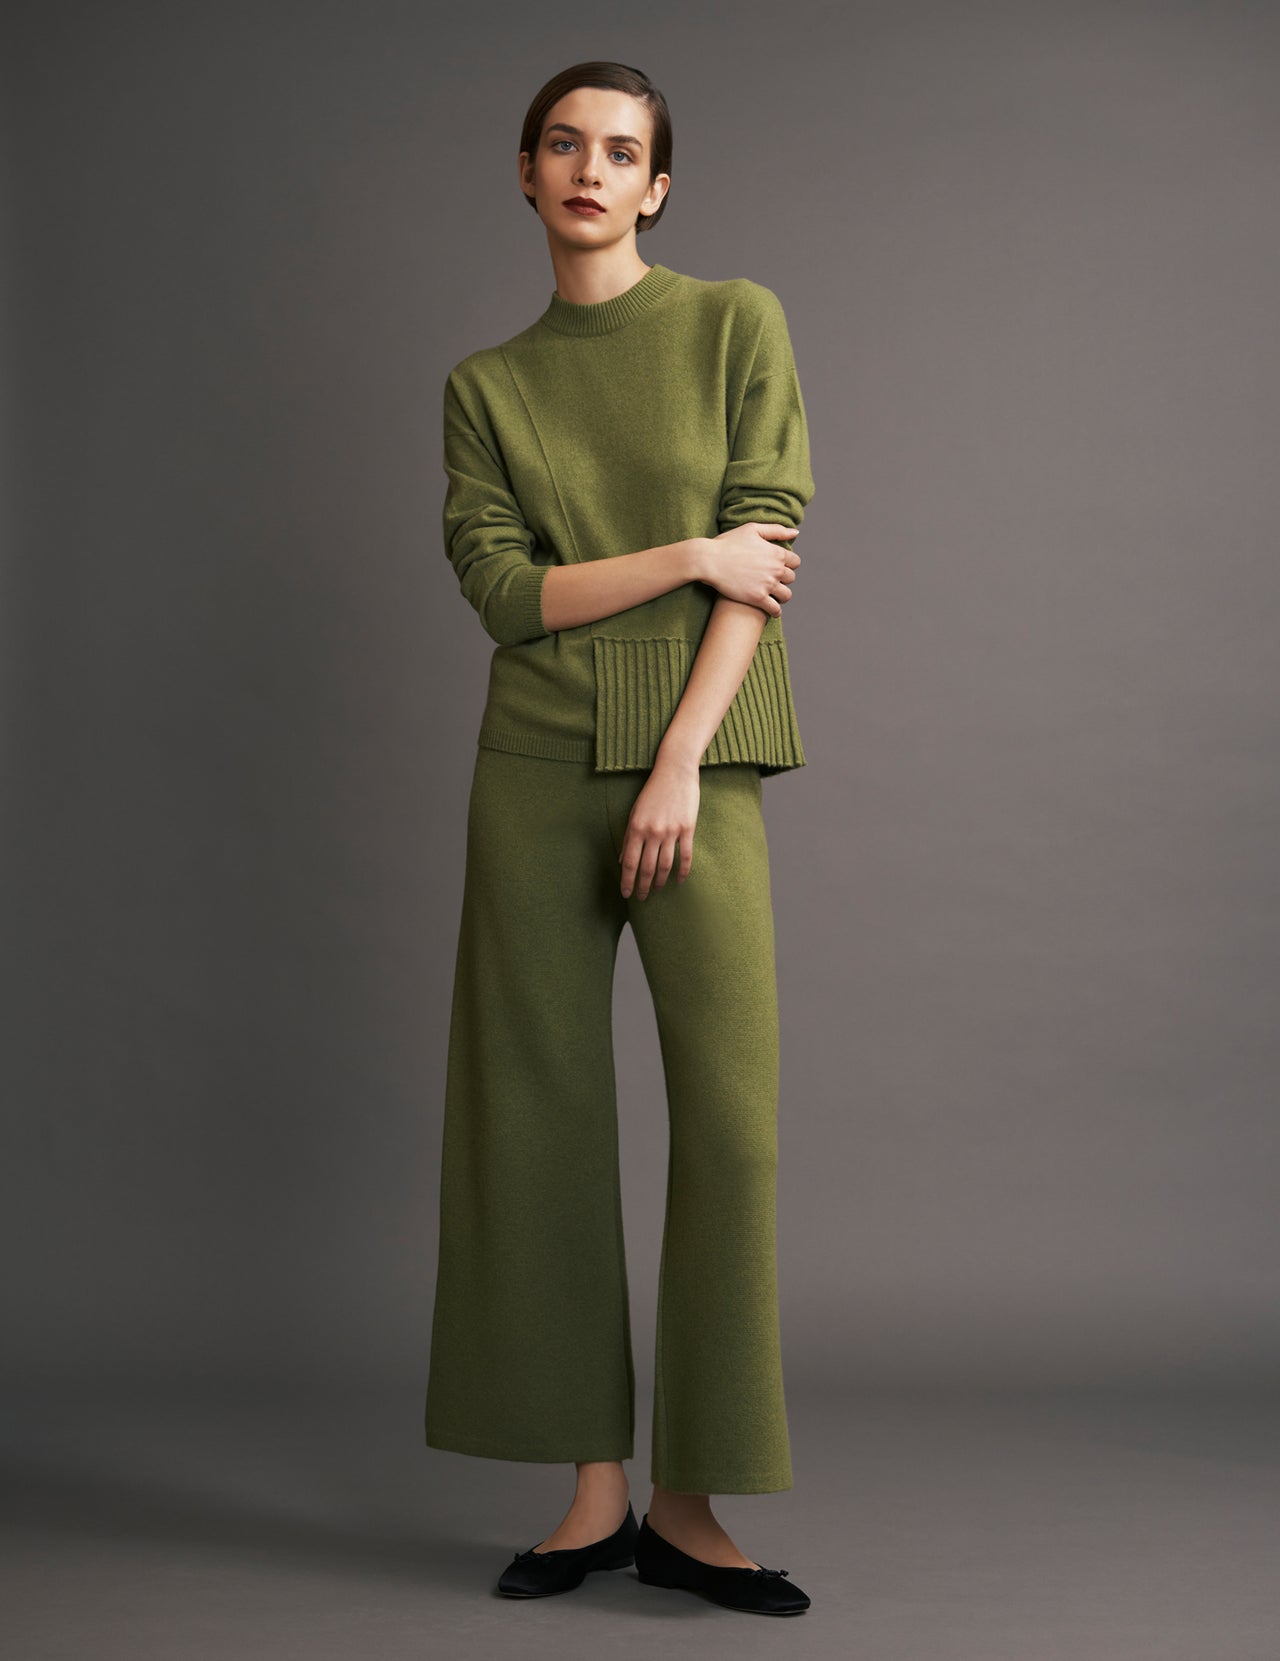  Bamboo Green Cashmere Sweater With Pleats 